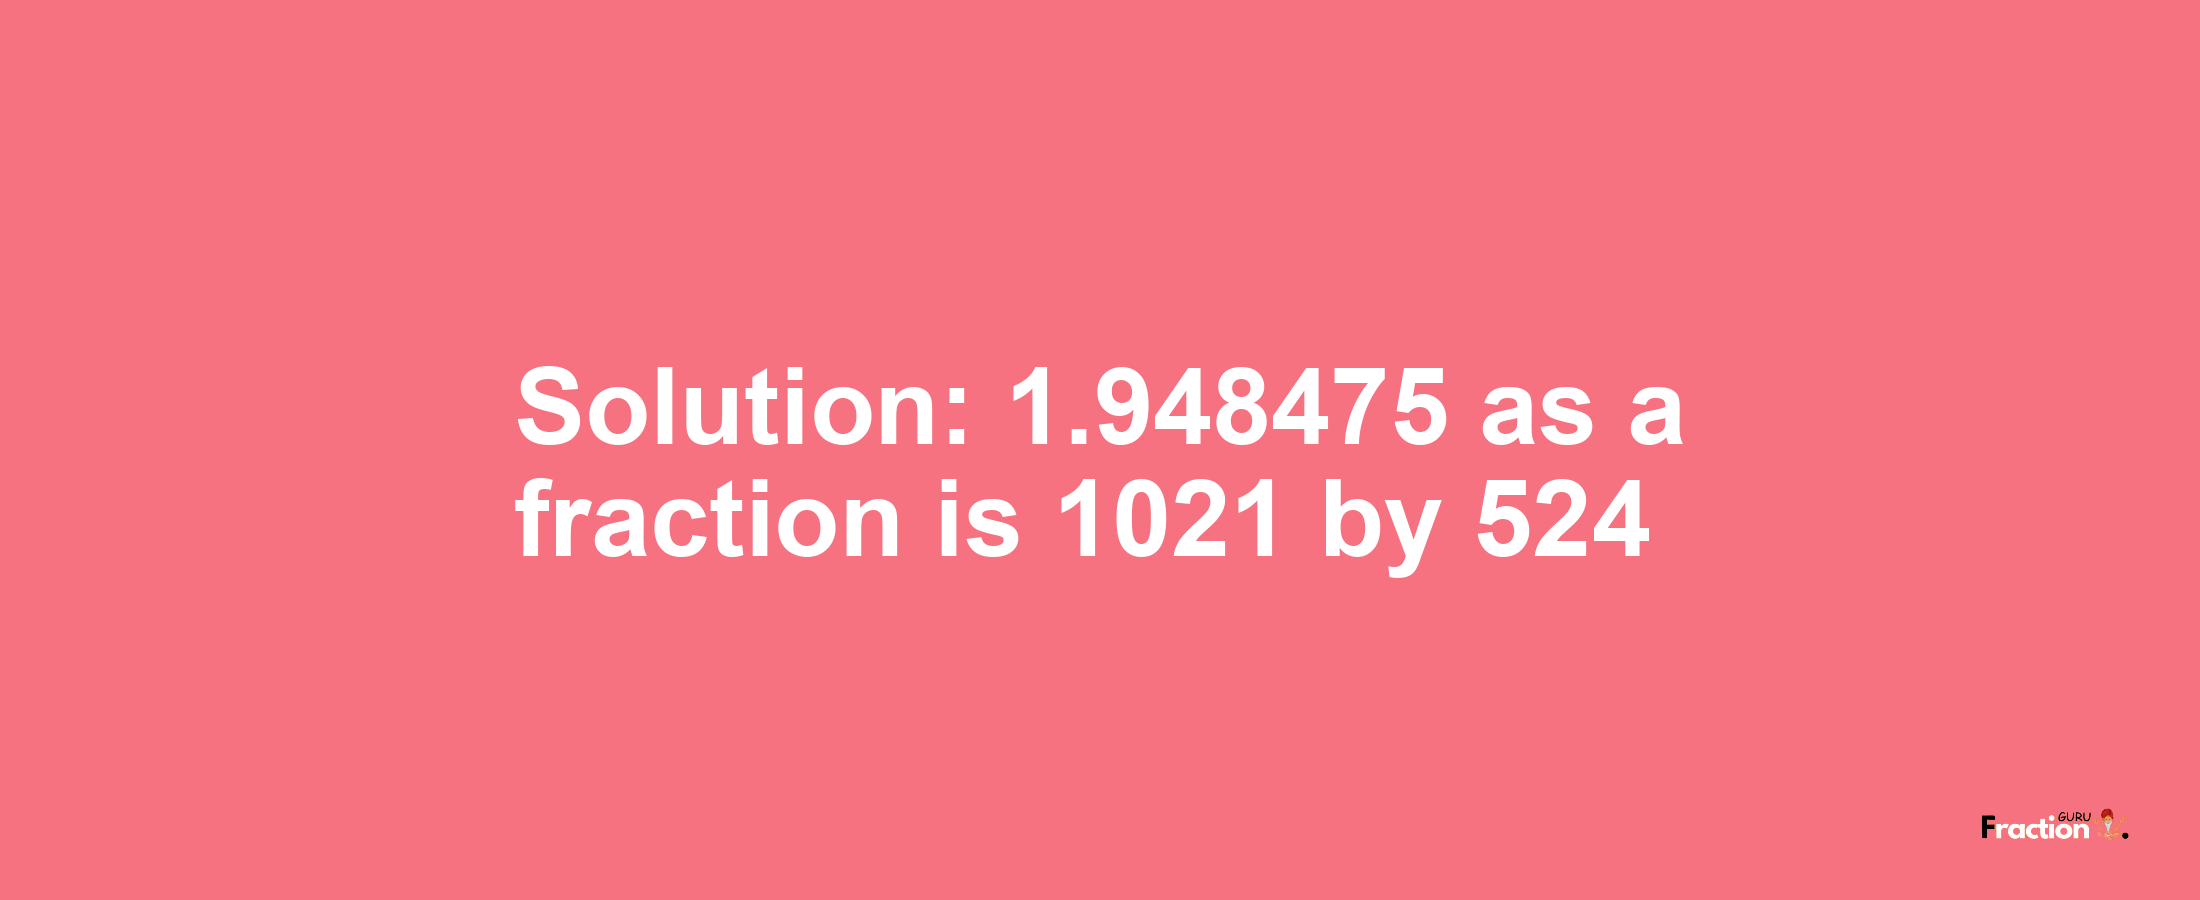 Solution:1.948475 as a fraction is 1021/524